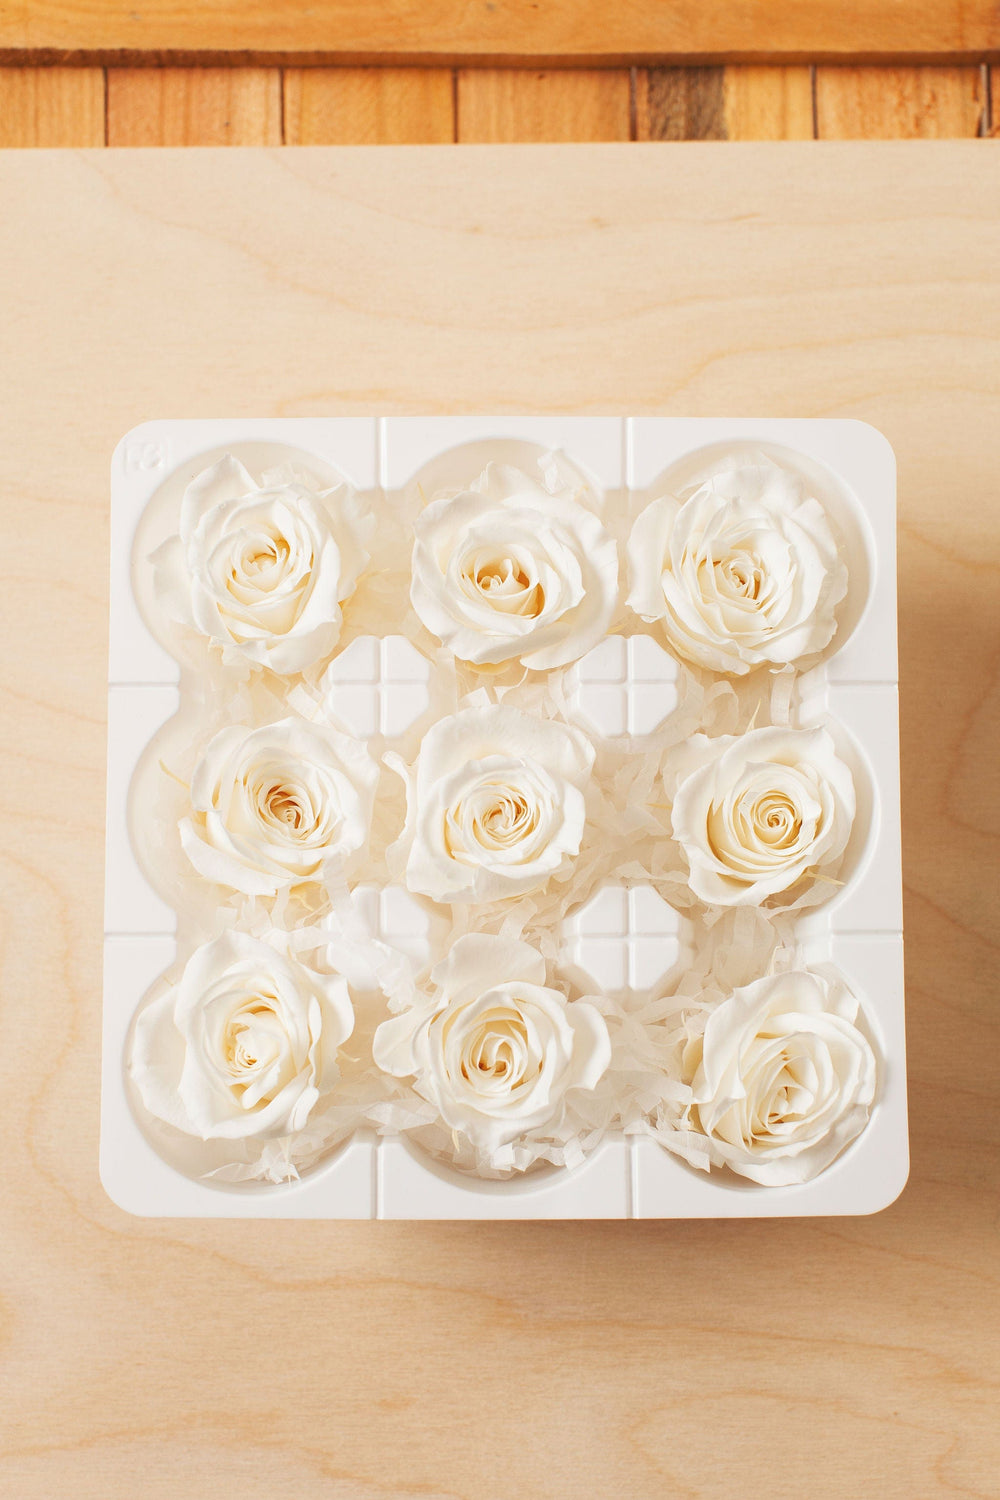 Idlewild Floral Co. Dried Flowers Preserved Mini White Roses